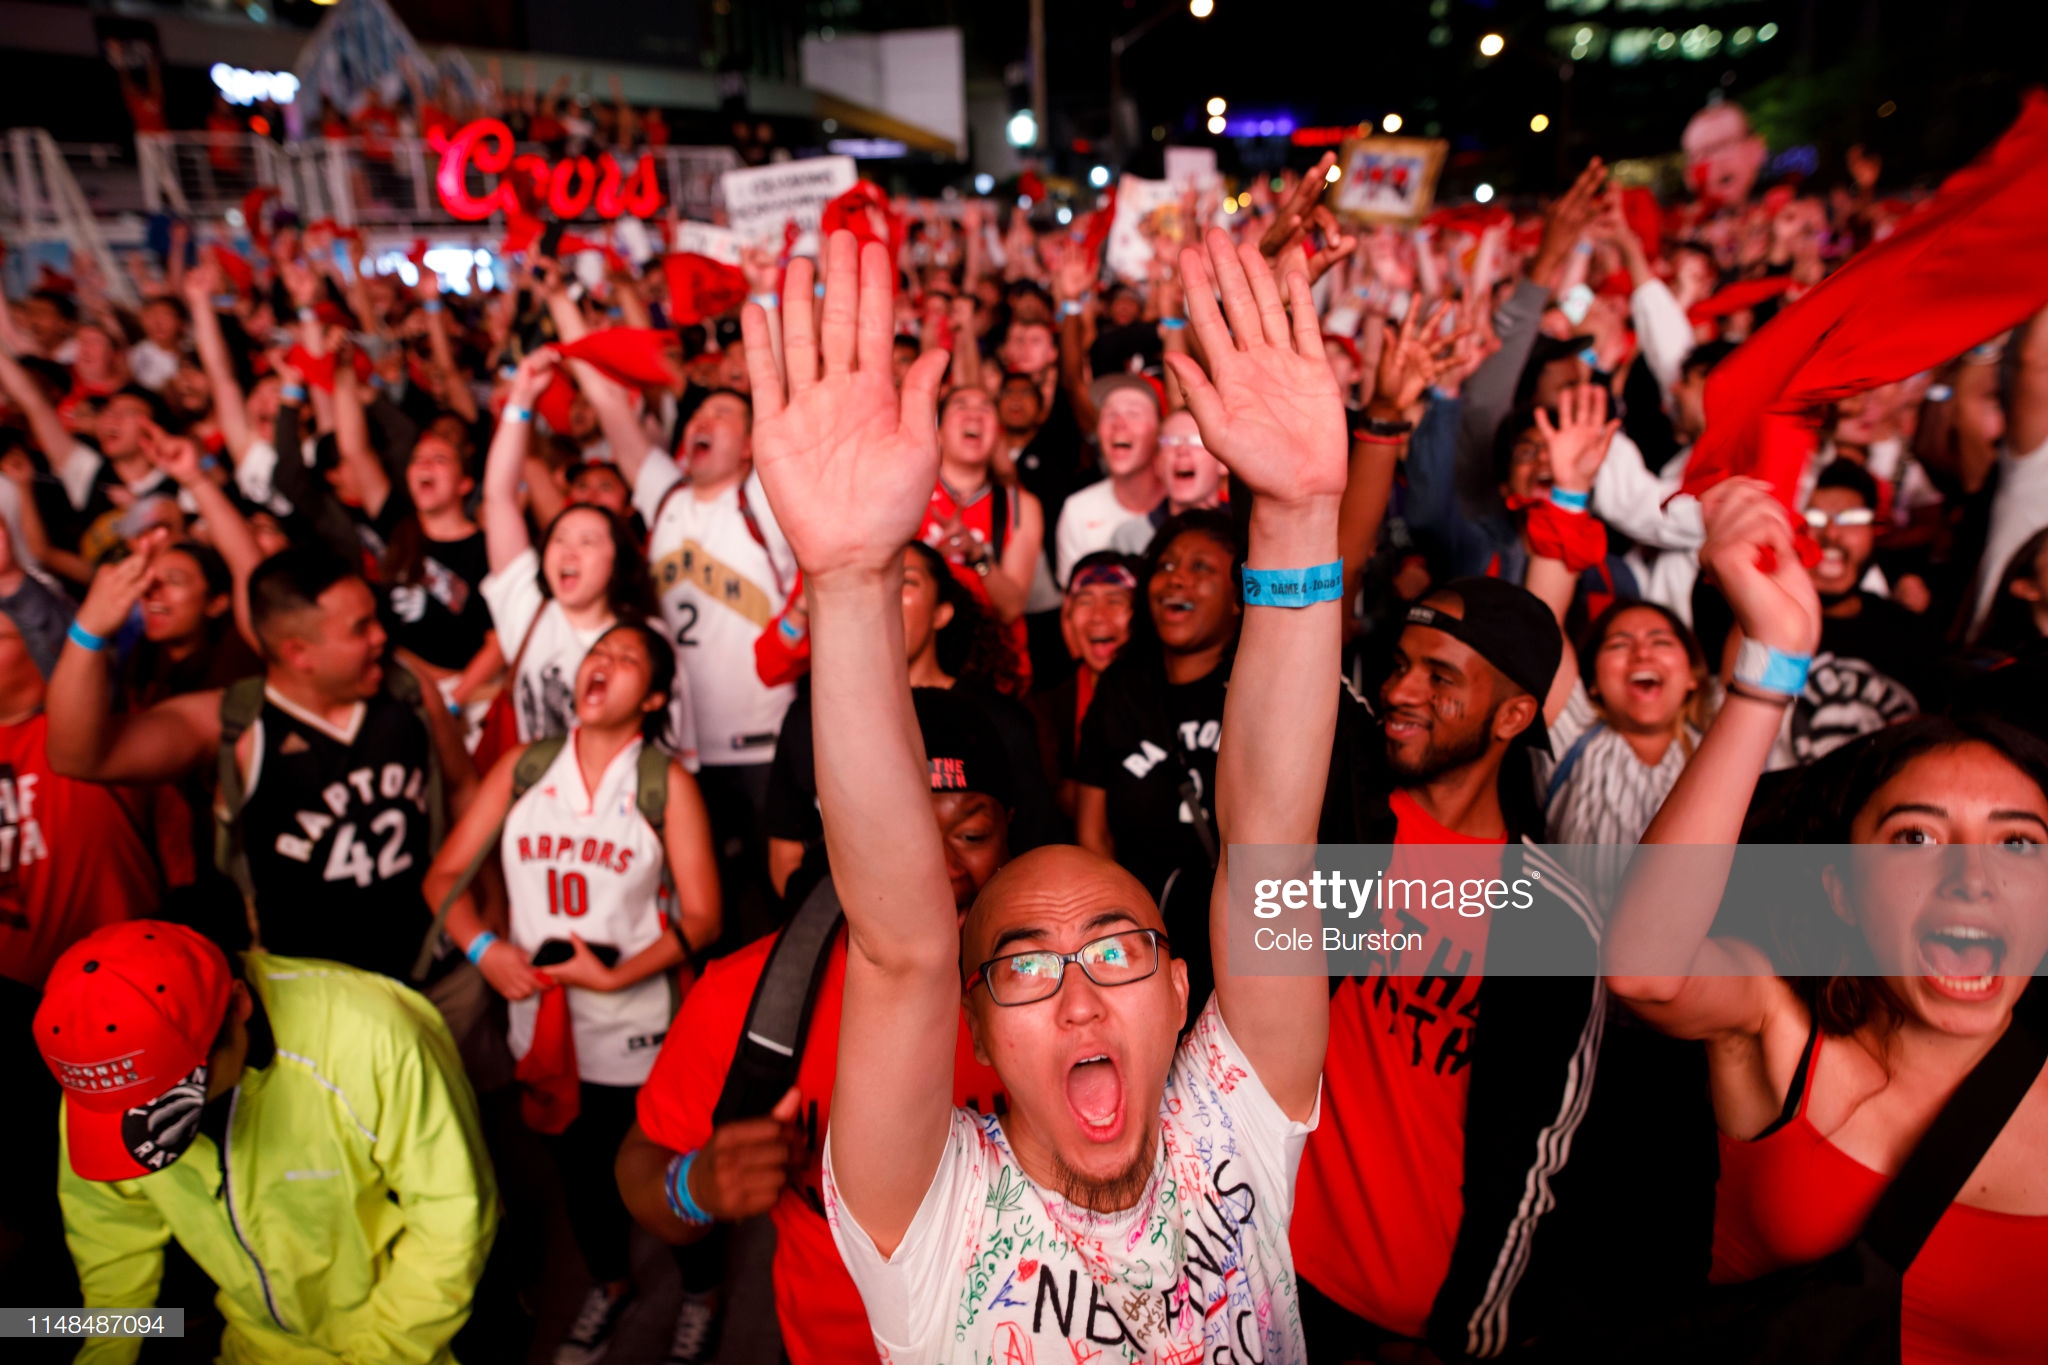 https://media.gettyimages.com/photos/fans-react-as-toronto-raptors-fans-gather-to-watch-game-4-of-the-nba-picture-id1148487094?s=2048x2048